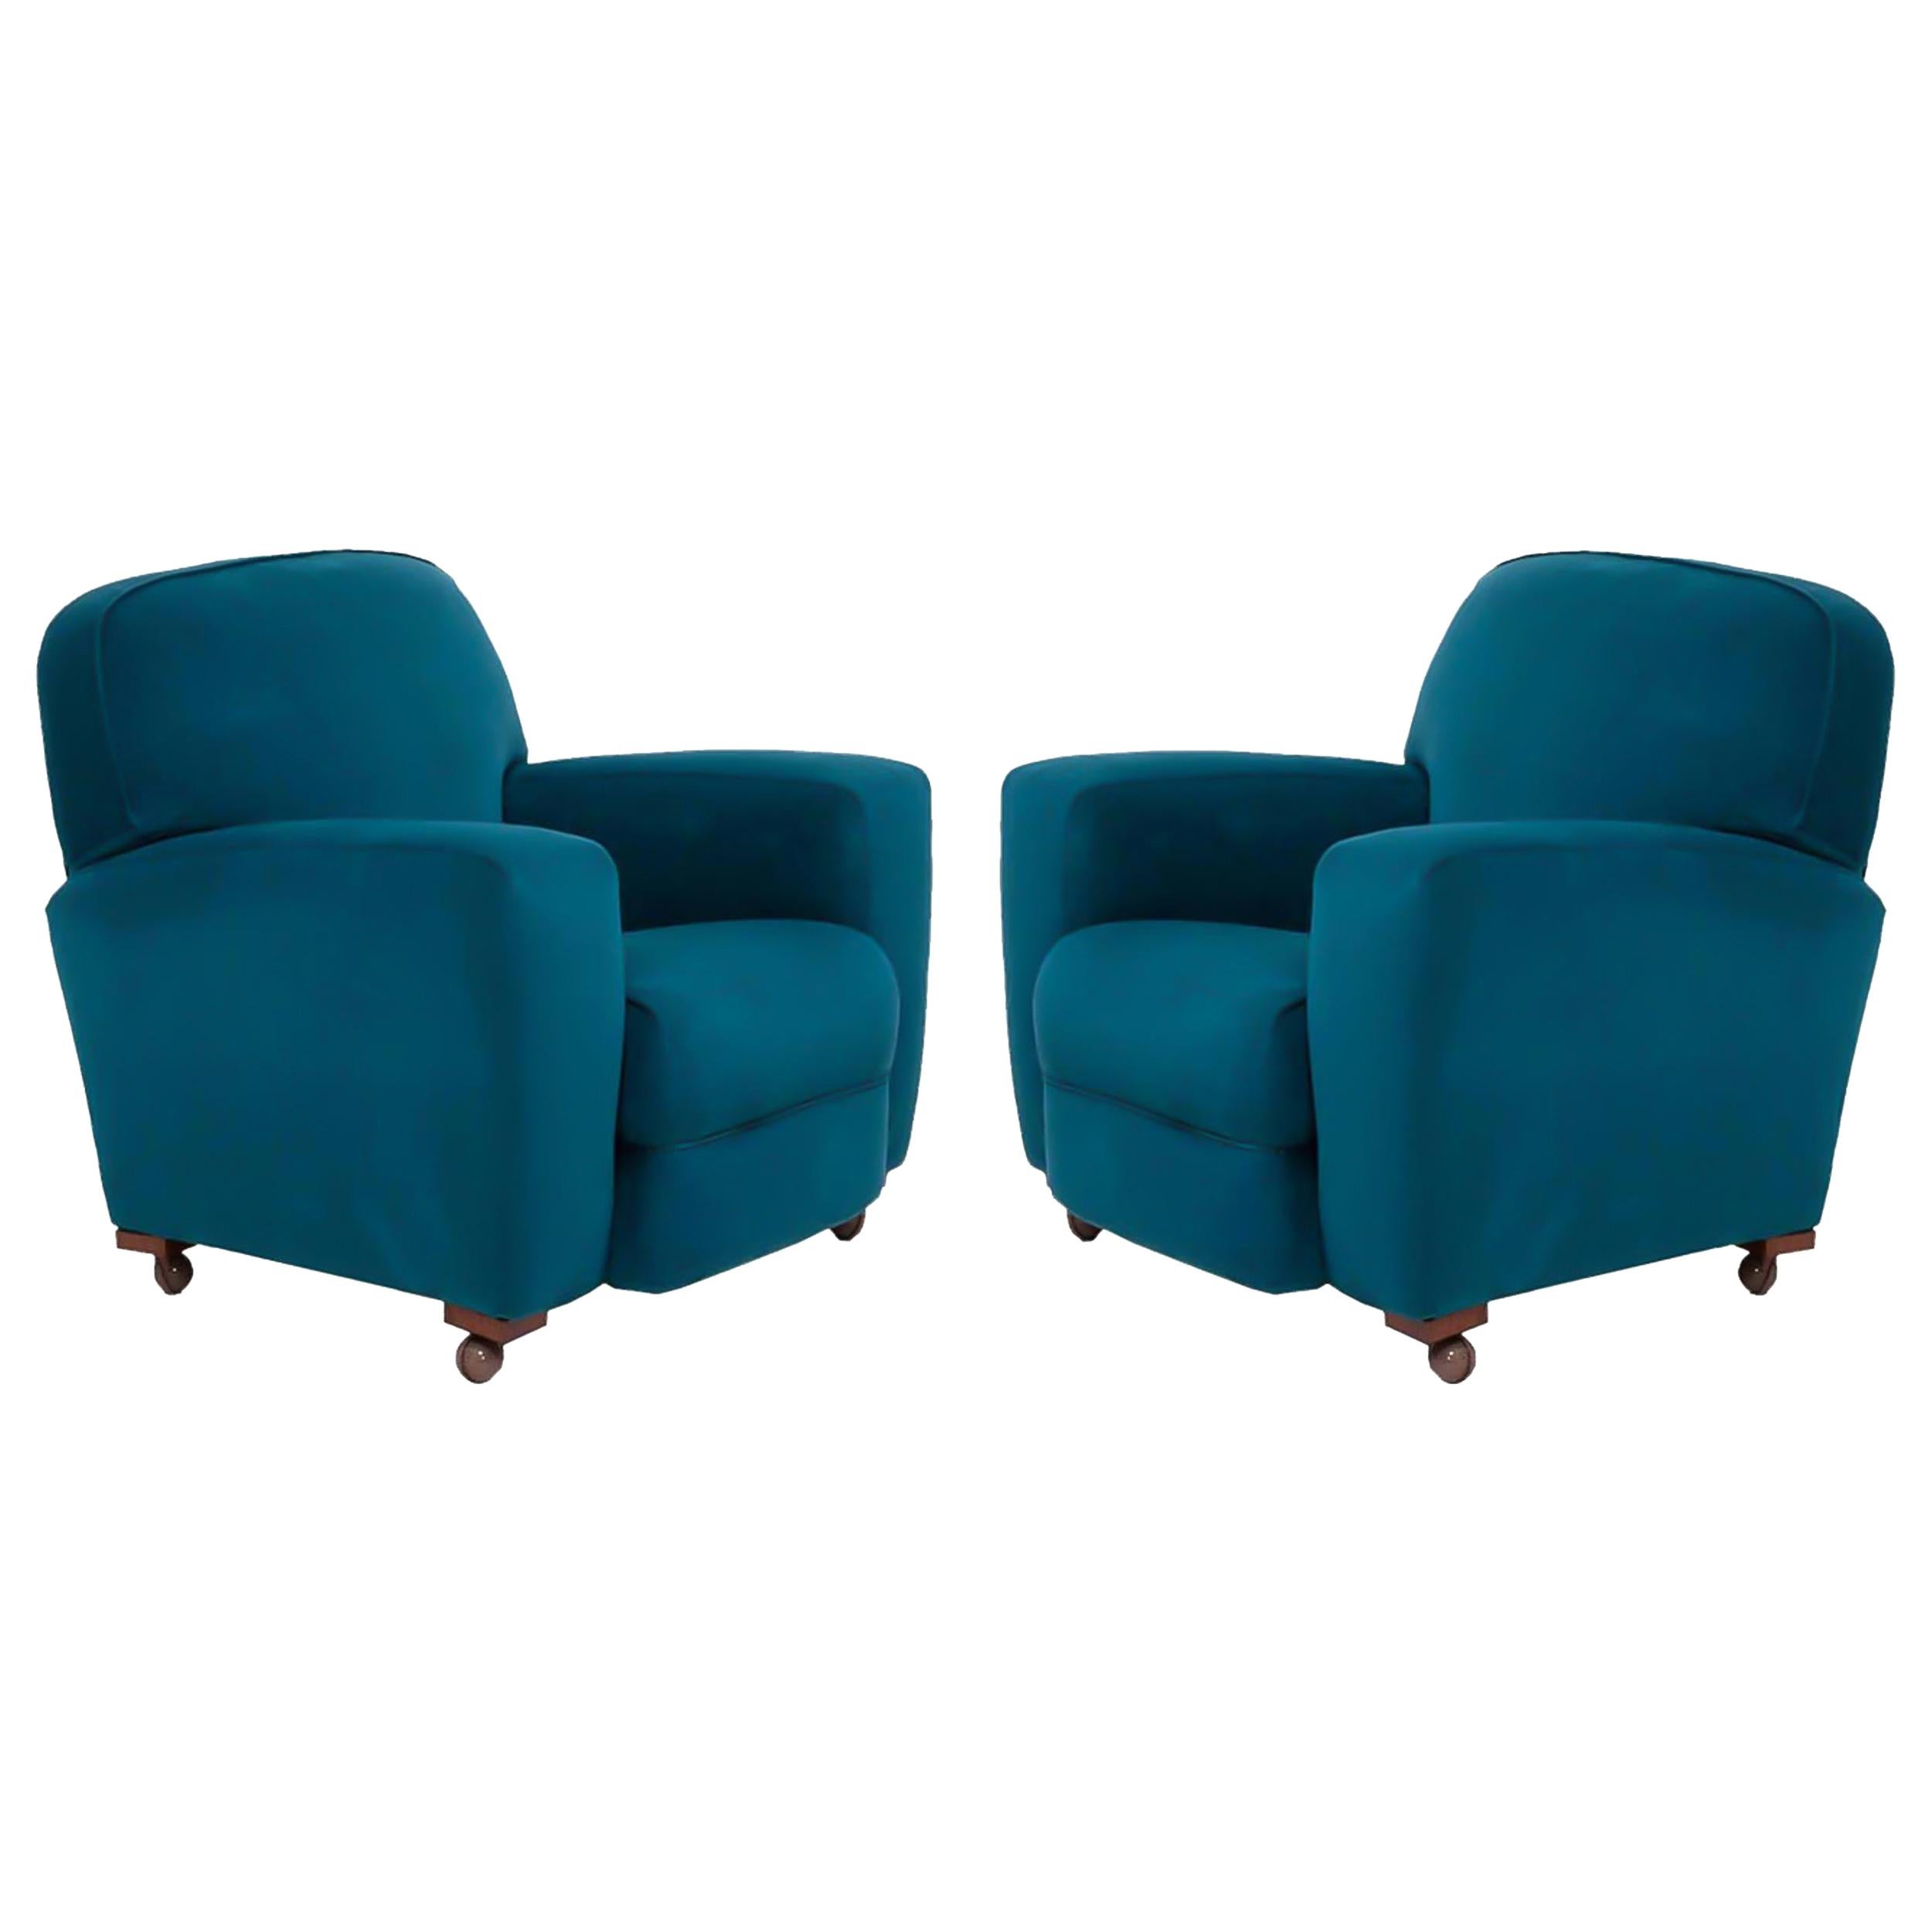 Original 1930s Art Deco Curved Blue Teal Velvet Armchairs, Newly Upholstered